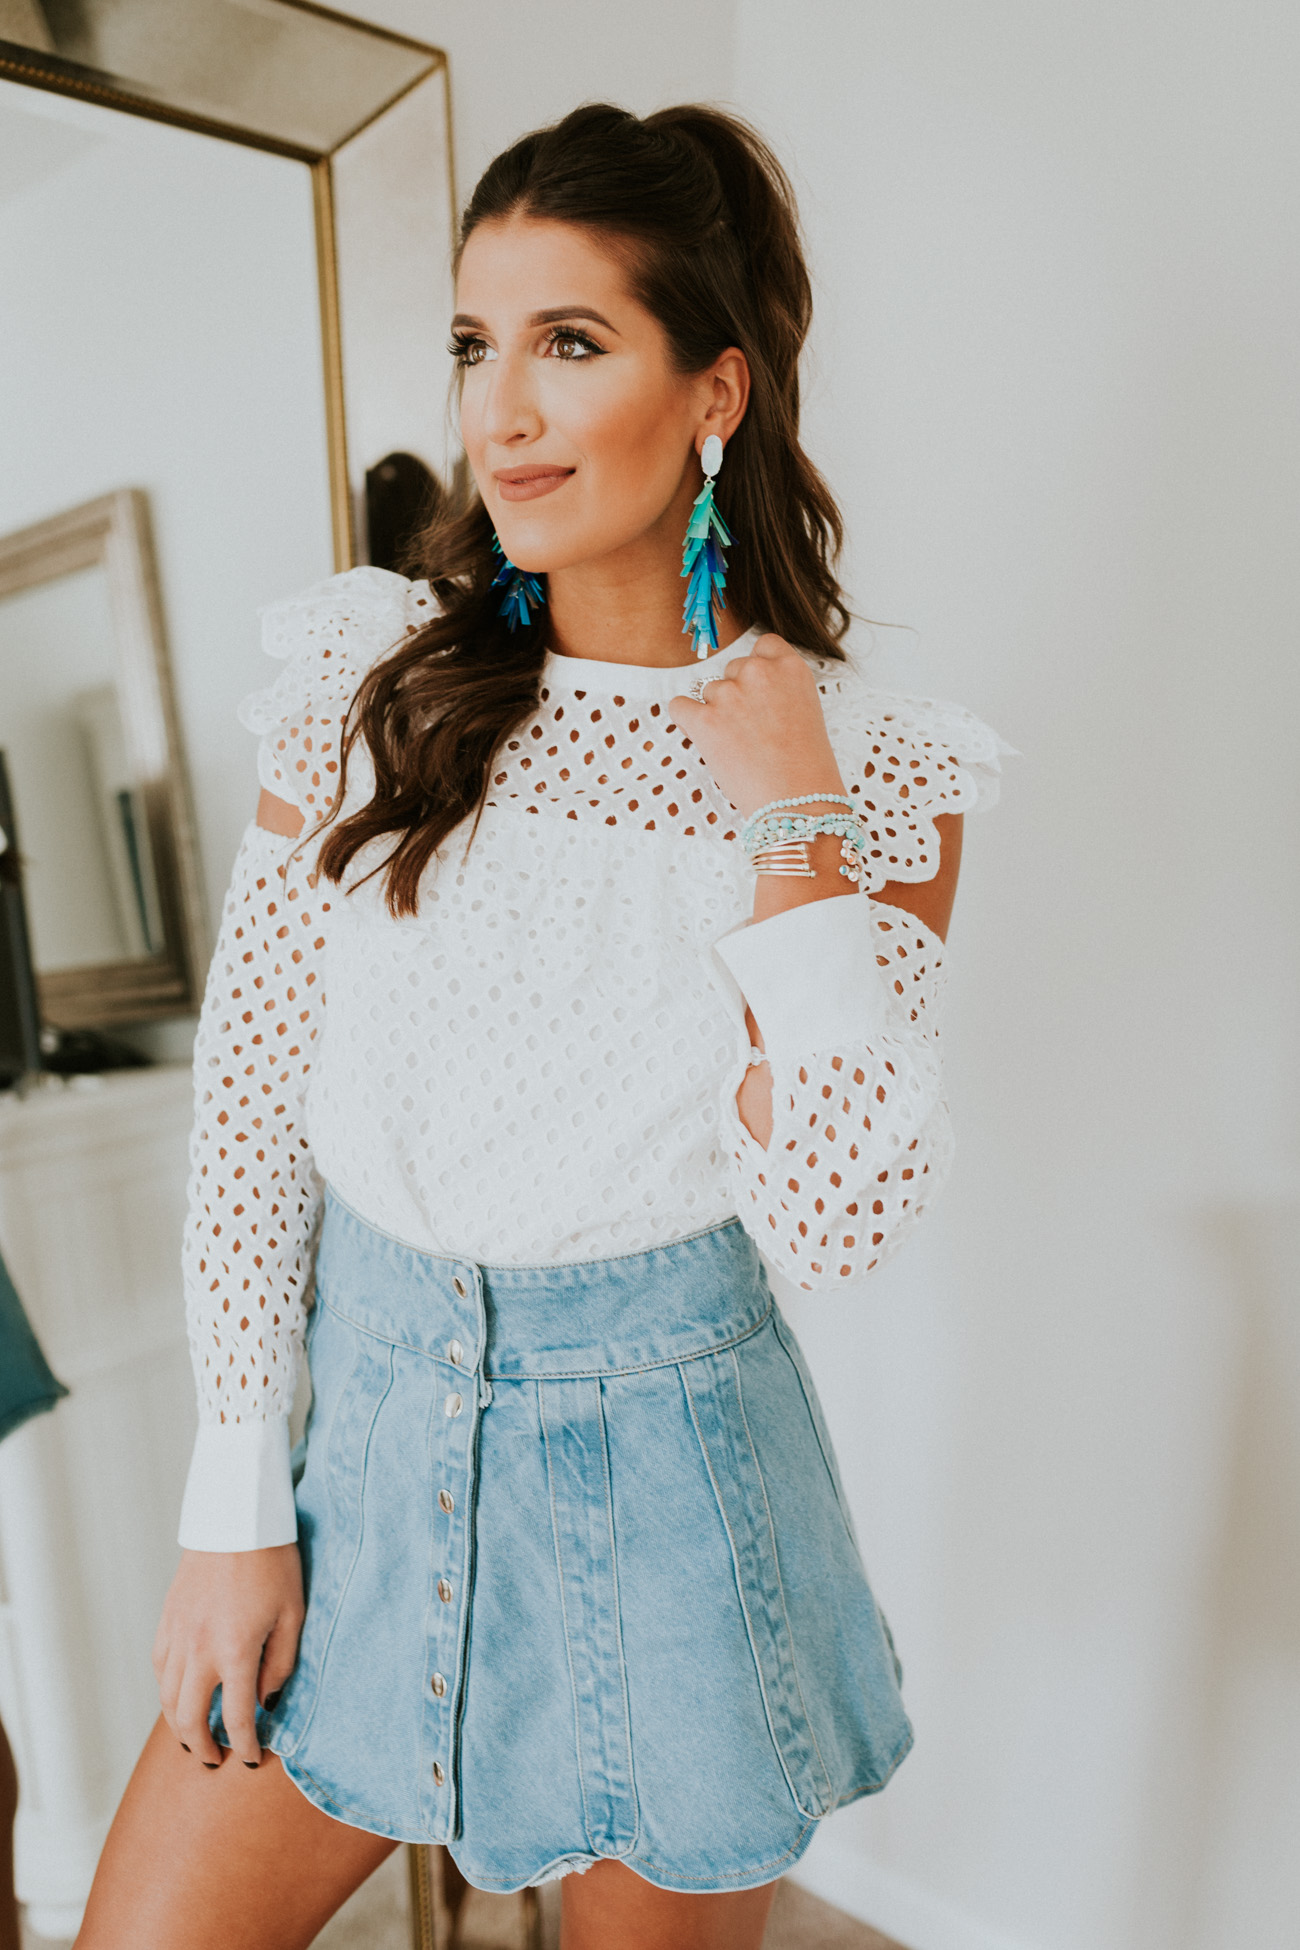 kendra scott spring collection, kendra scott justyne earrings, kendra scott jewelry, kendra scott amazonite earrings, denim skirt, front button skirt, endless rose top, feminine outfit, spring fashion, spring outfit ideas // grace wainwright a southern drawl